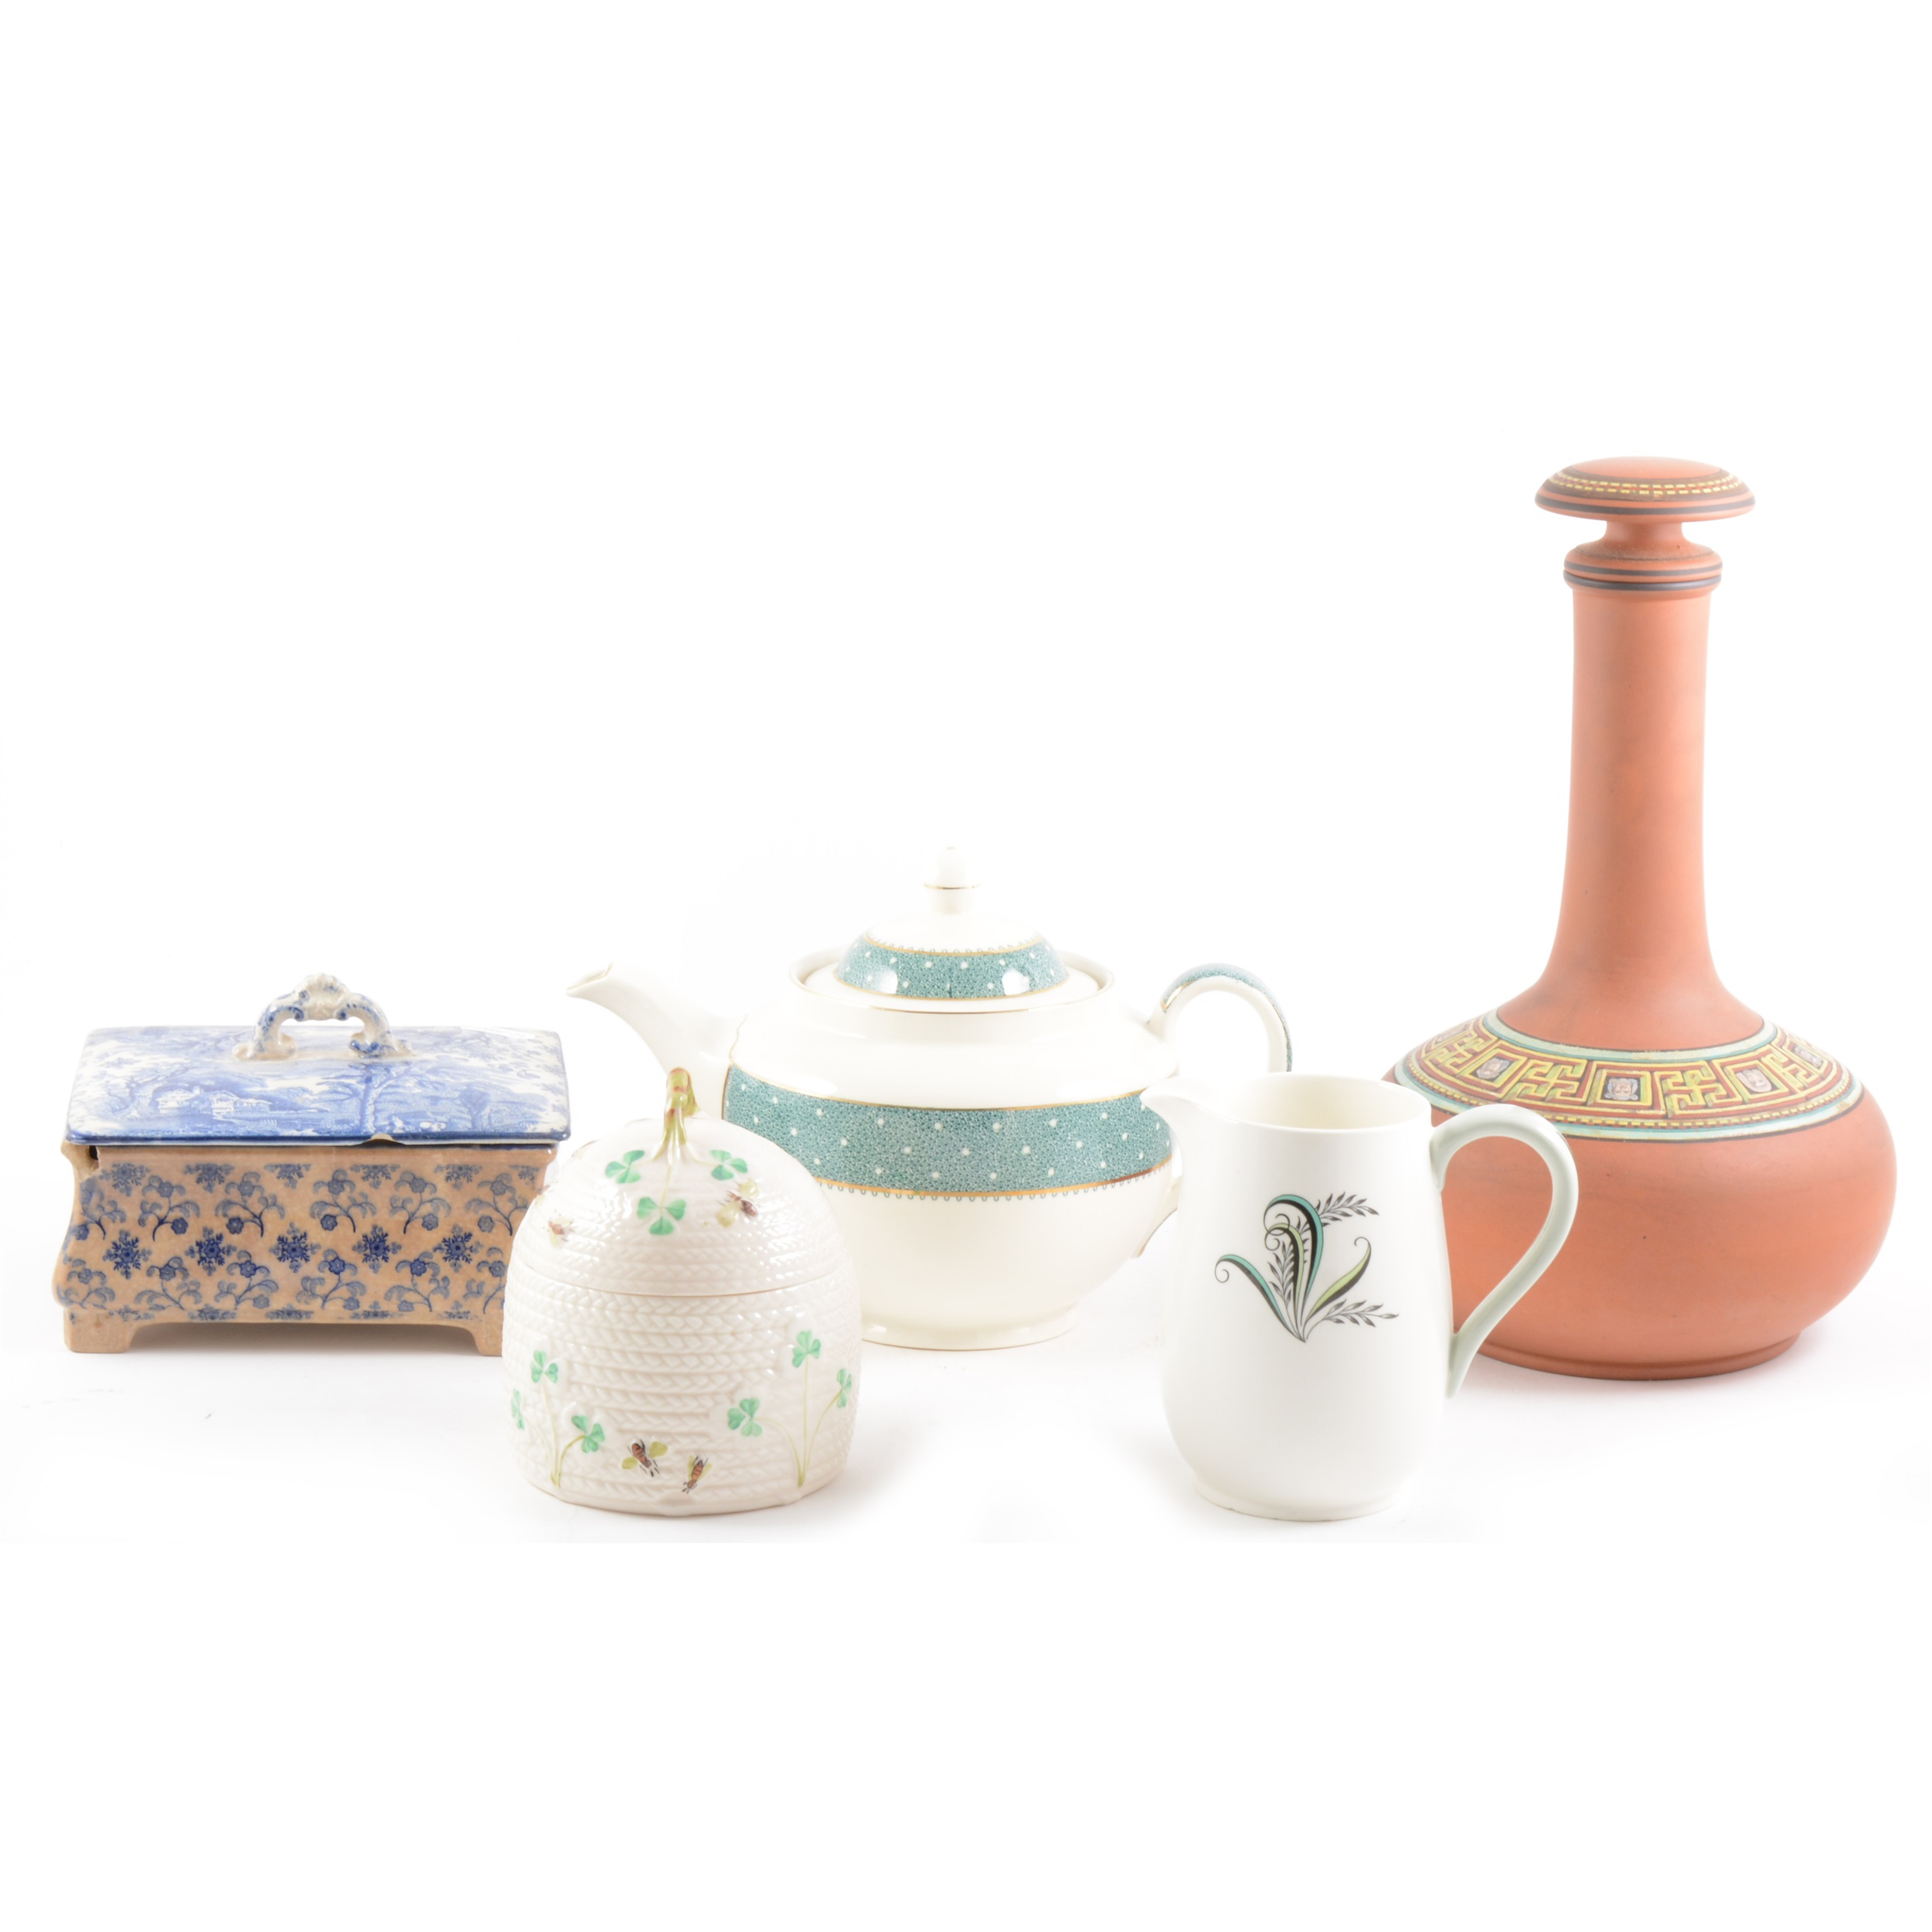 Wedgwood bone china teaset, Swallow pattern; and other teaware